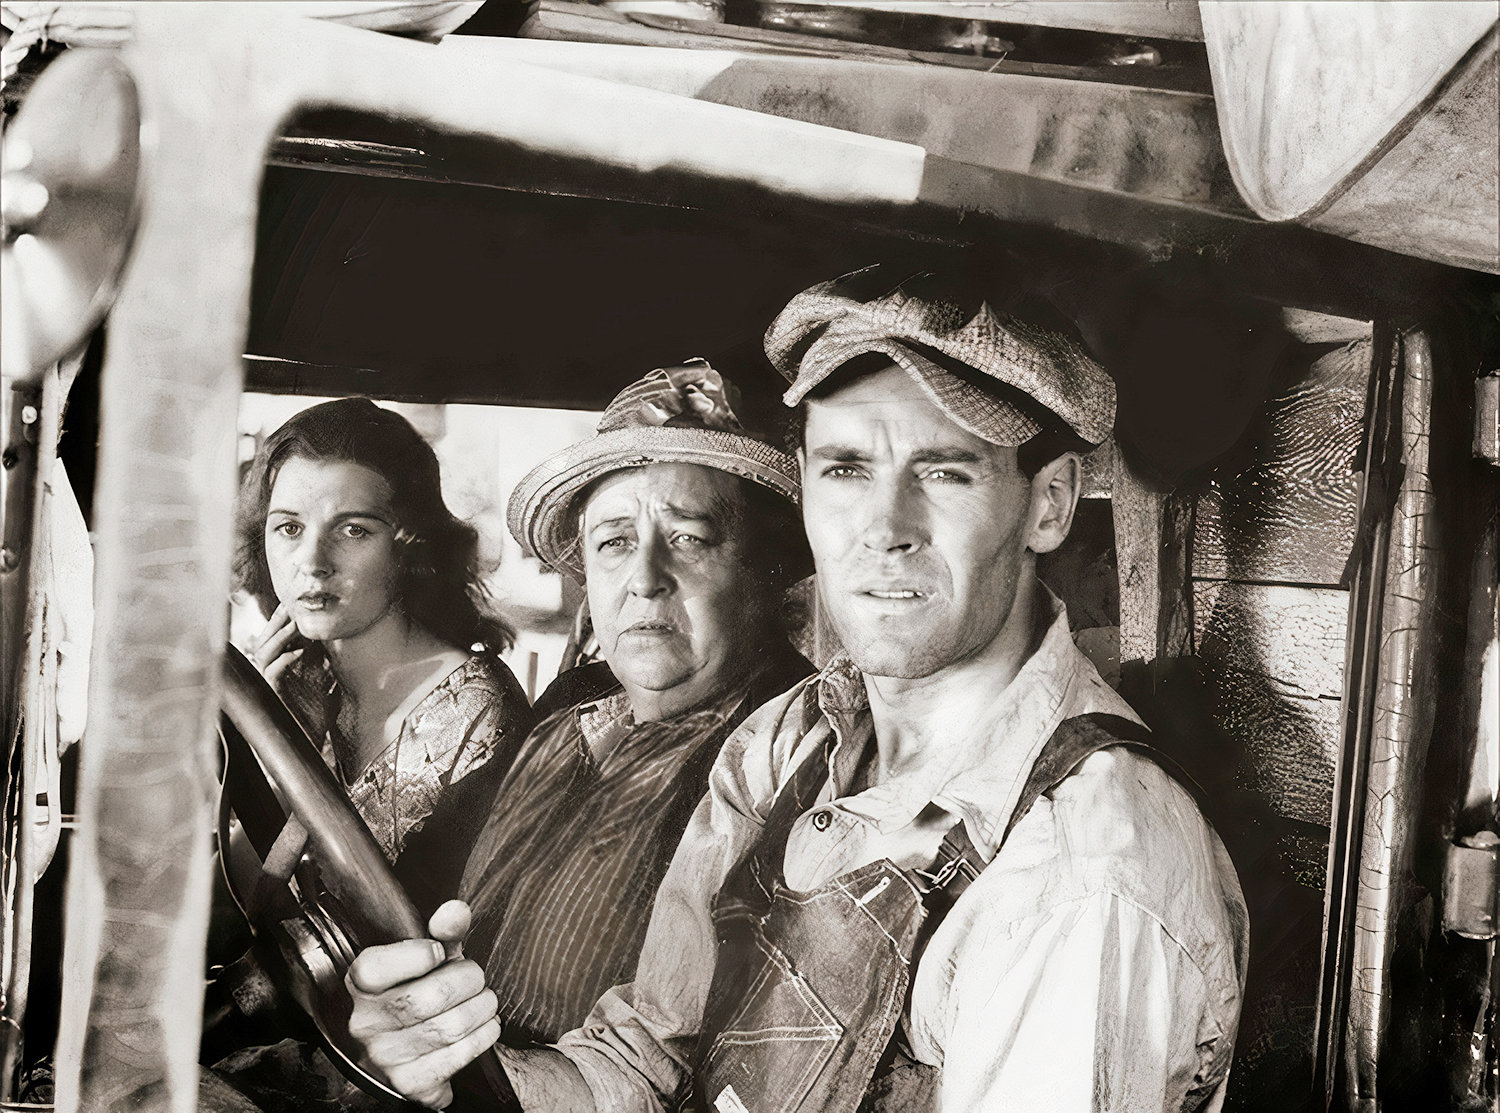 Scene from “The Grapes of Wrath”